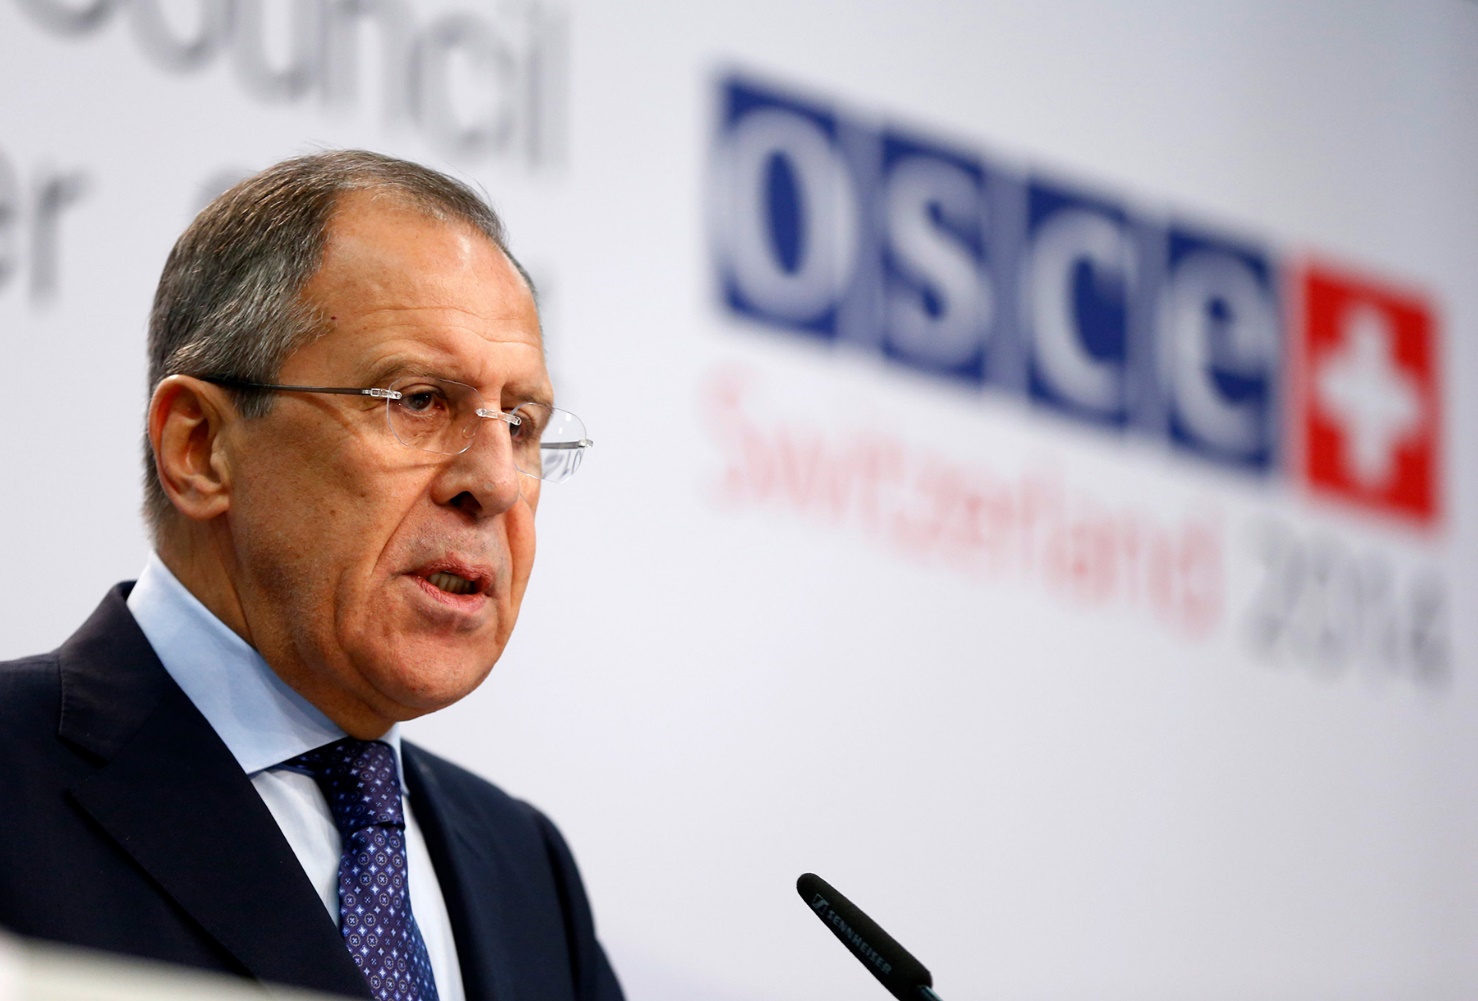 OSCE at death: Sergey Lavrov and the salvation of drowning